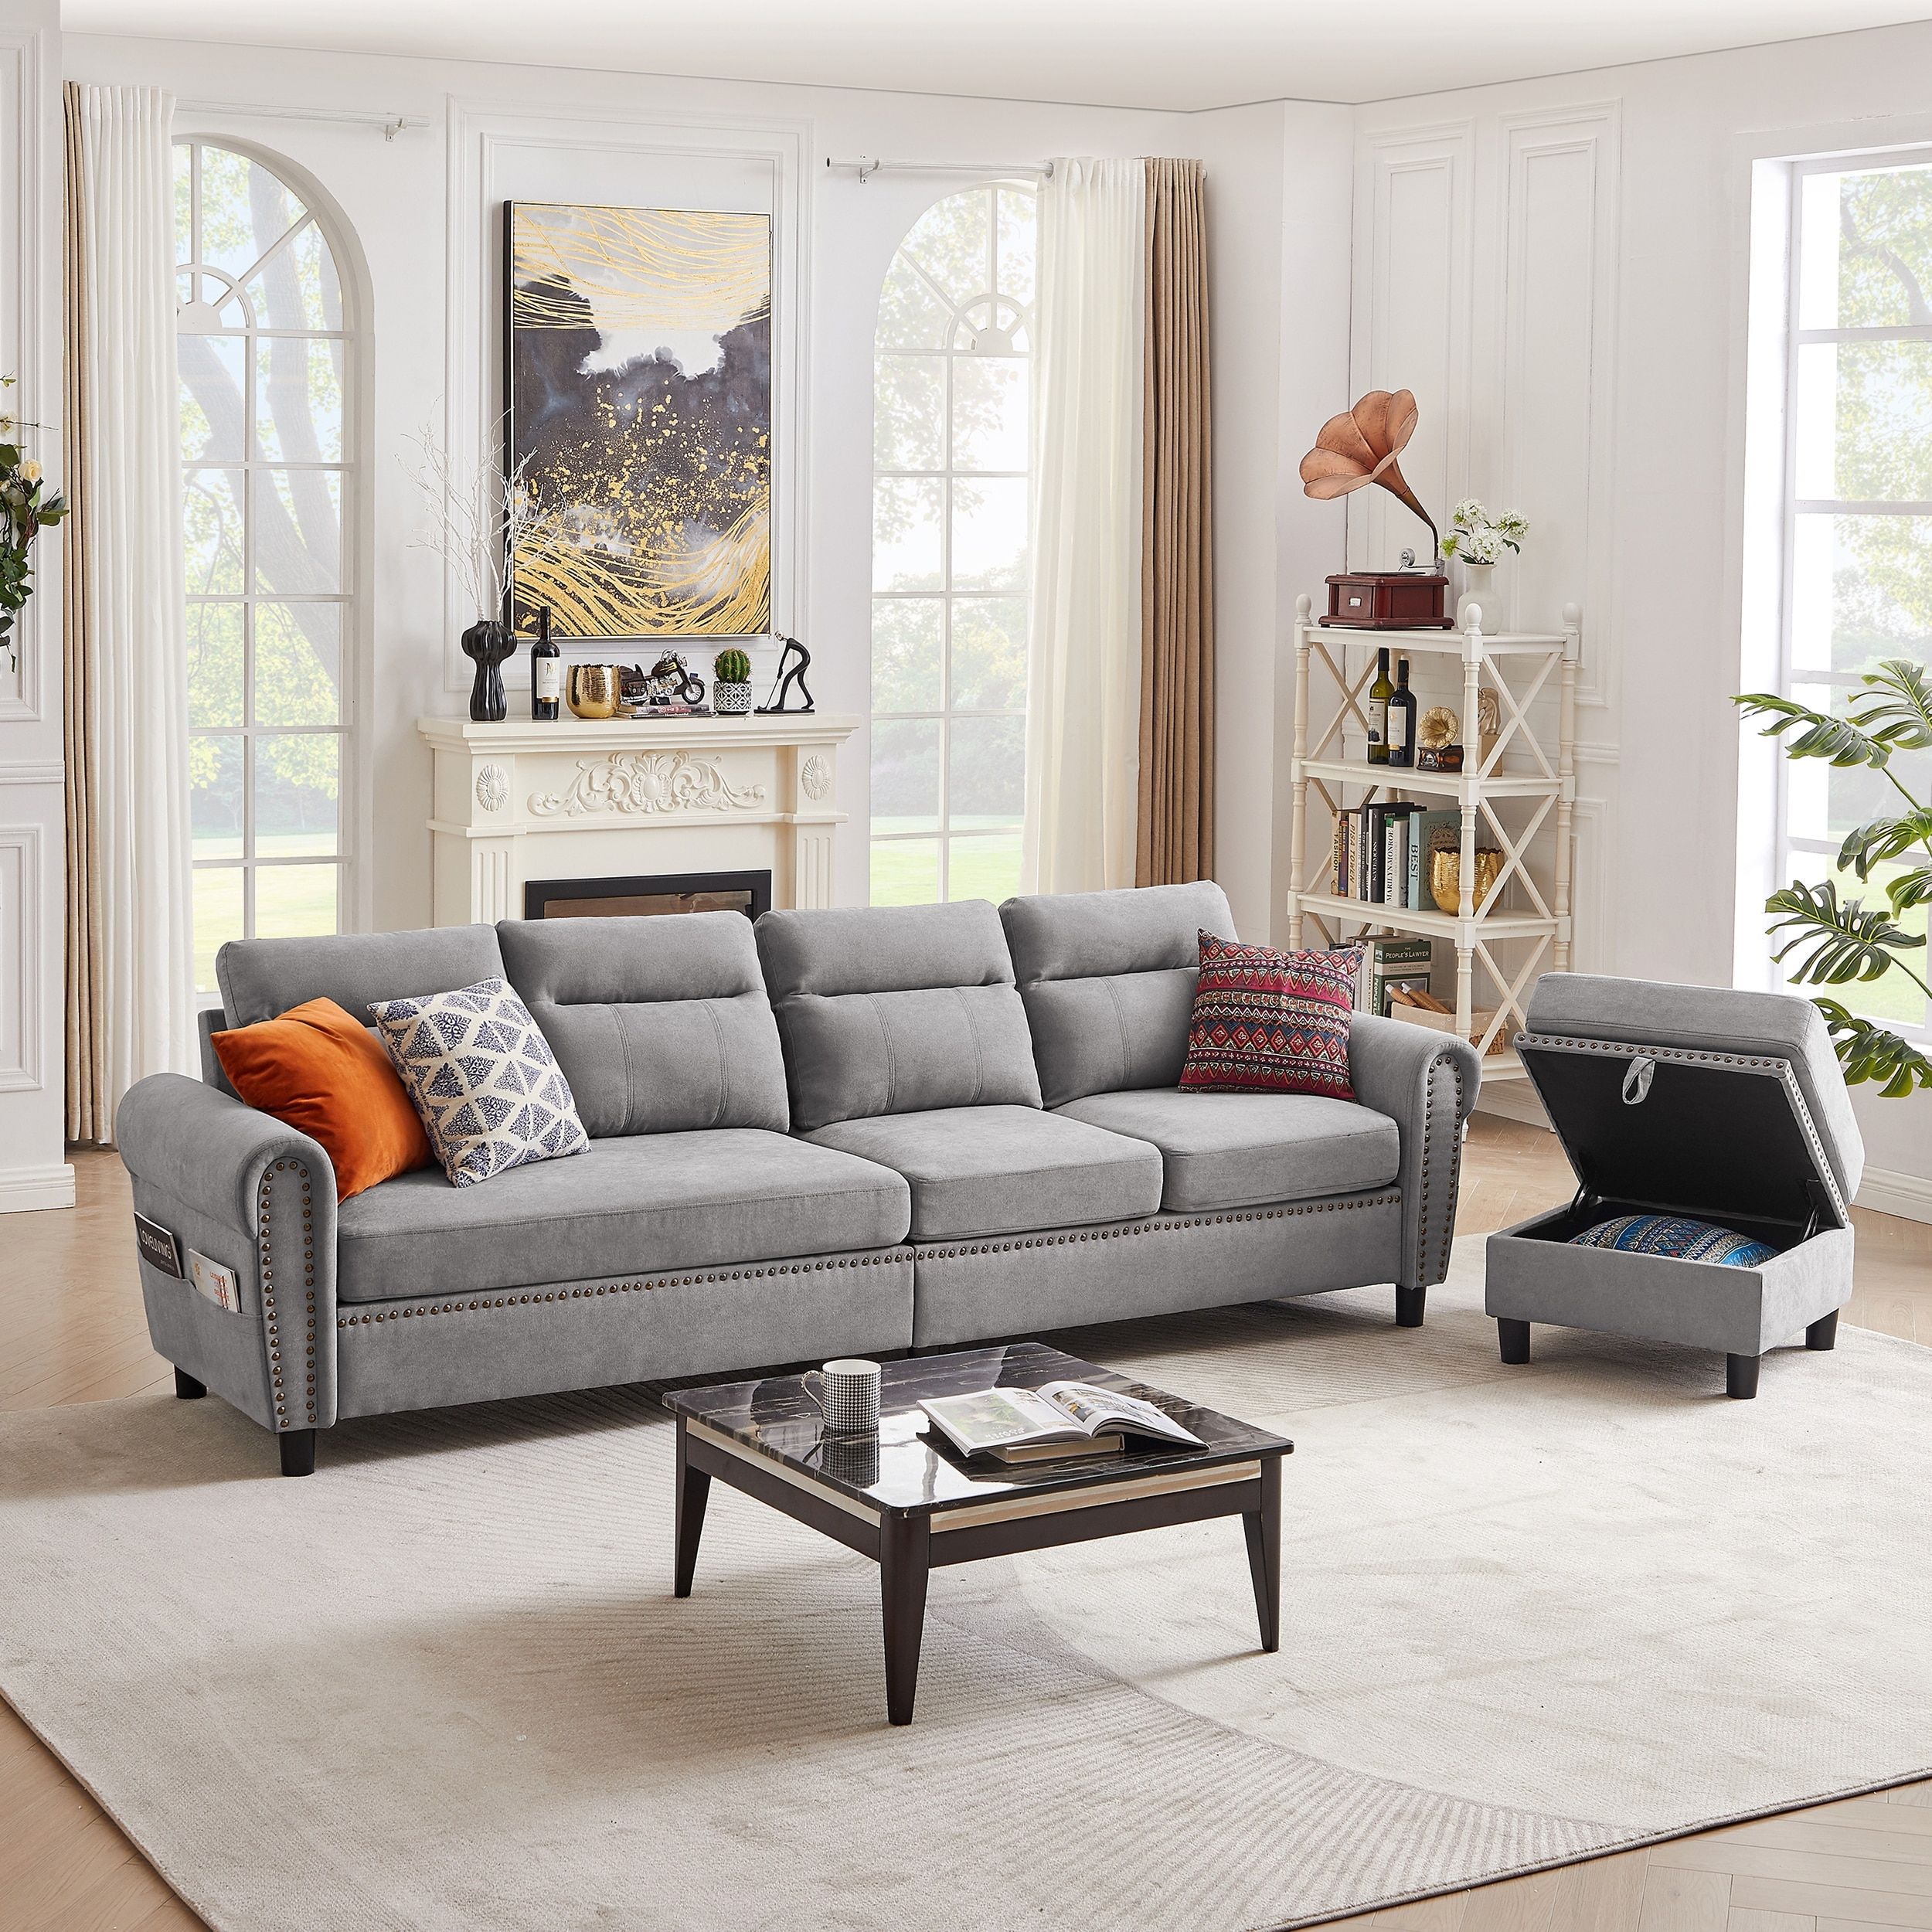 4 Seater L Shaped Reversible Sectional Sofa With Storage Ottoman – Bed Bath  & Beyond – 37992798 Throughout Reversible Sectional Sofas (View 5 of 15)